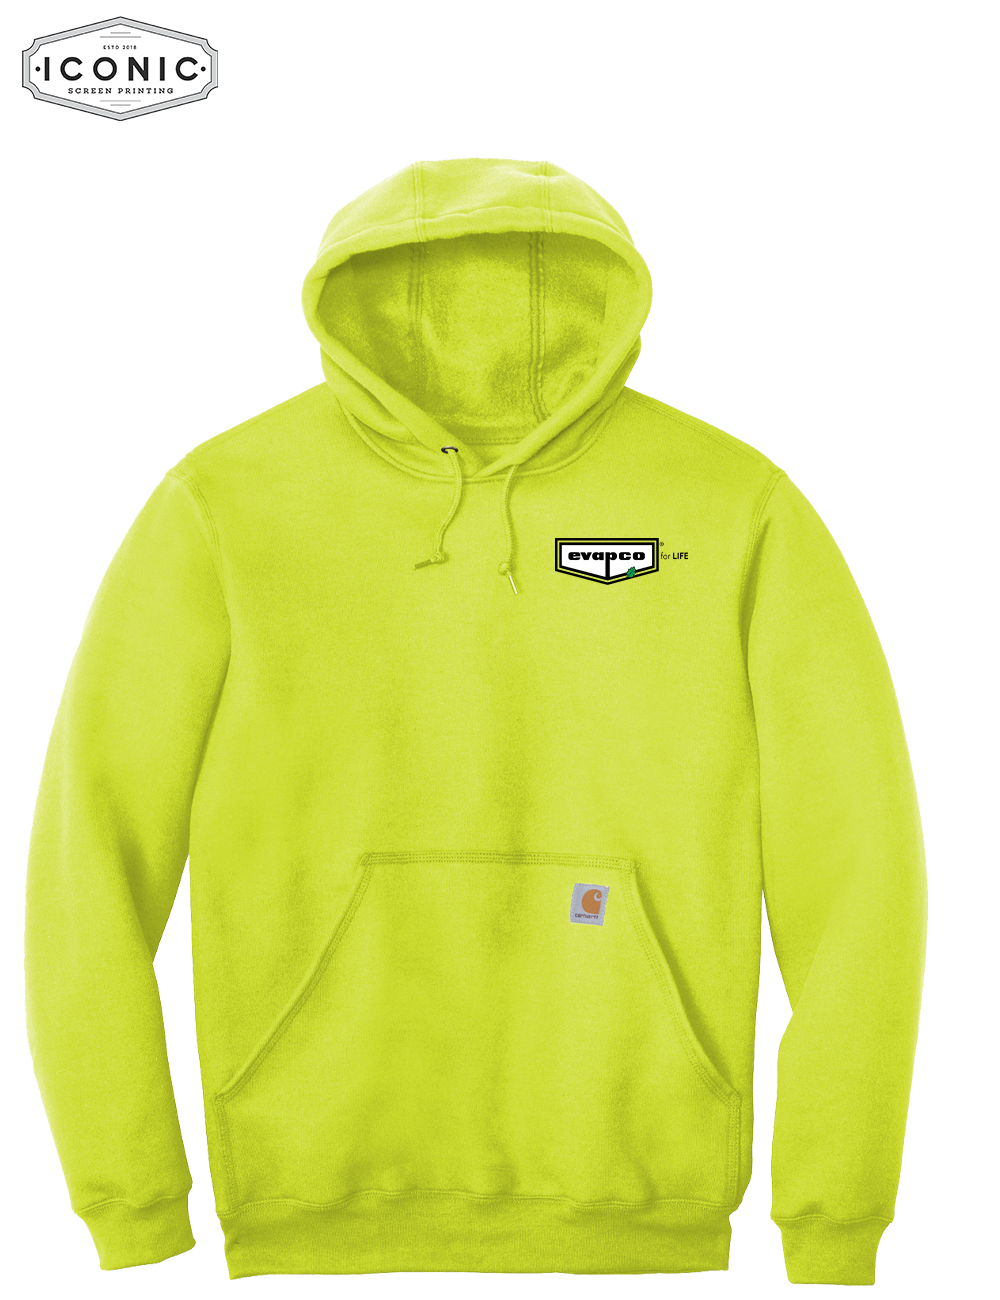 Evapco for Life - Carhartt Midweight Hooded Sweatshirt - Embroidery